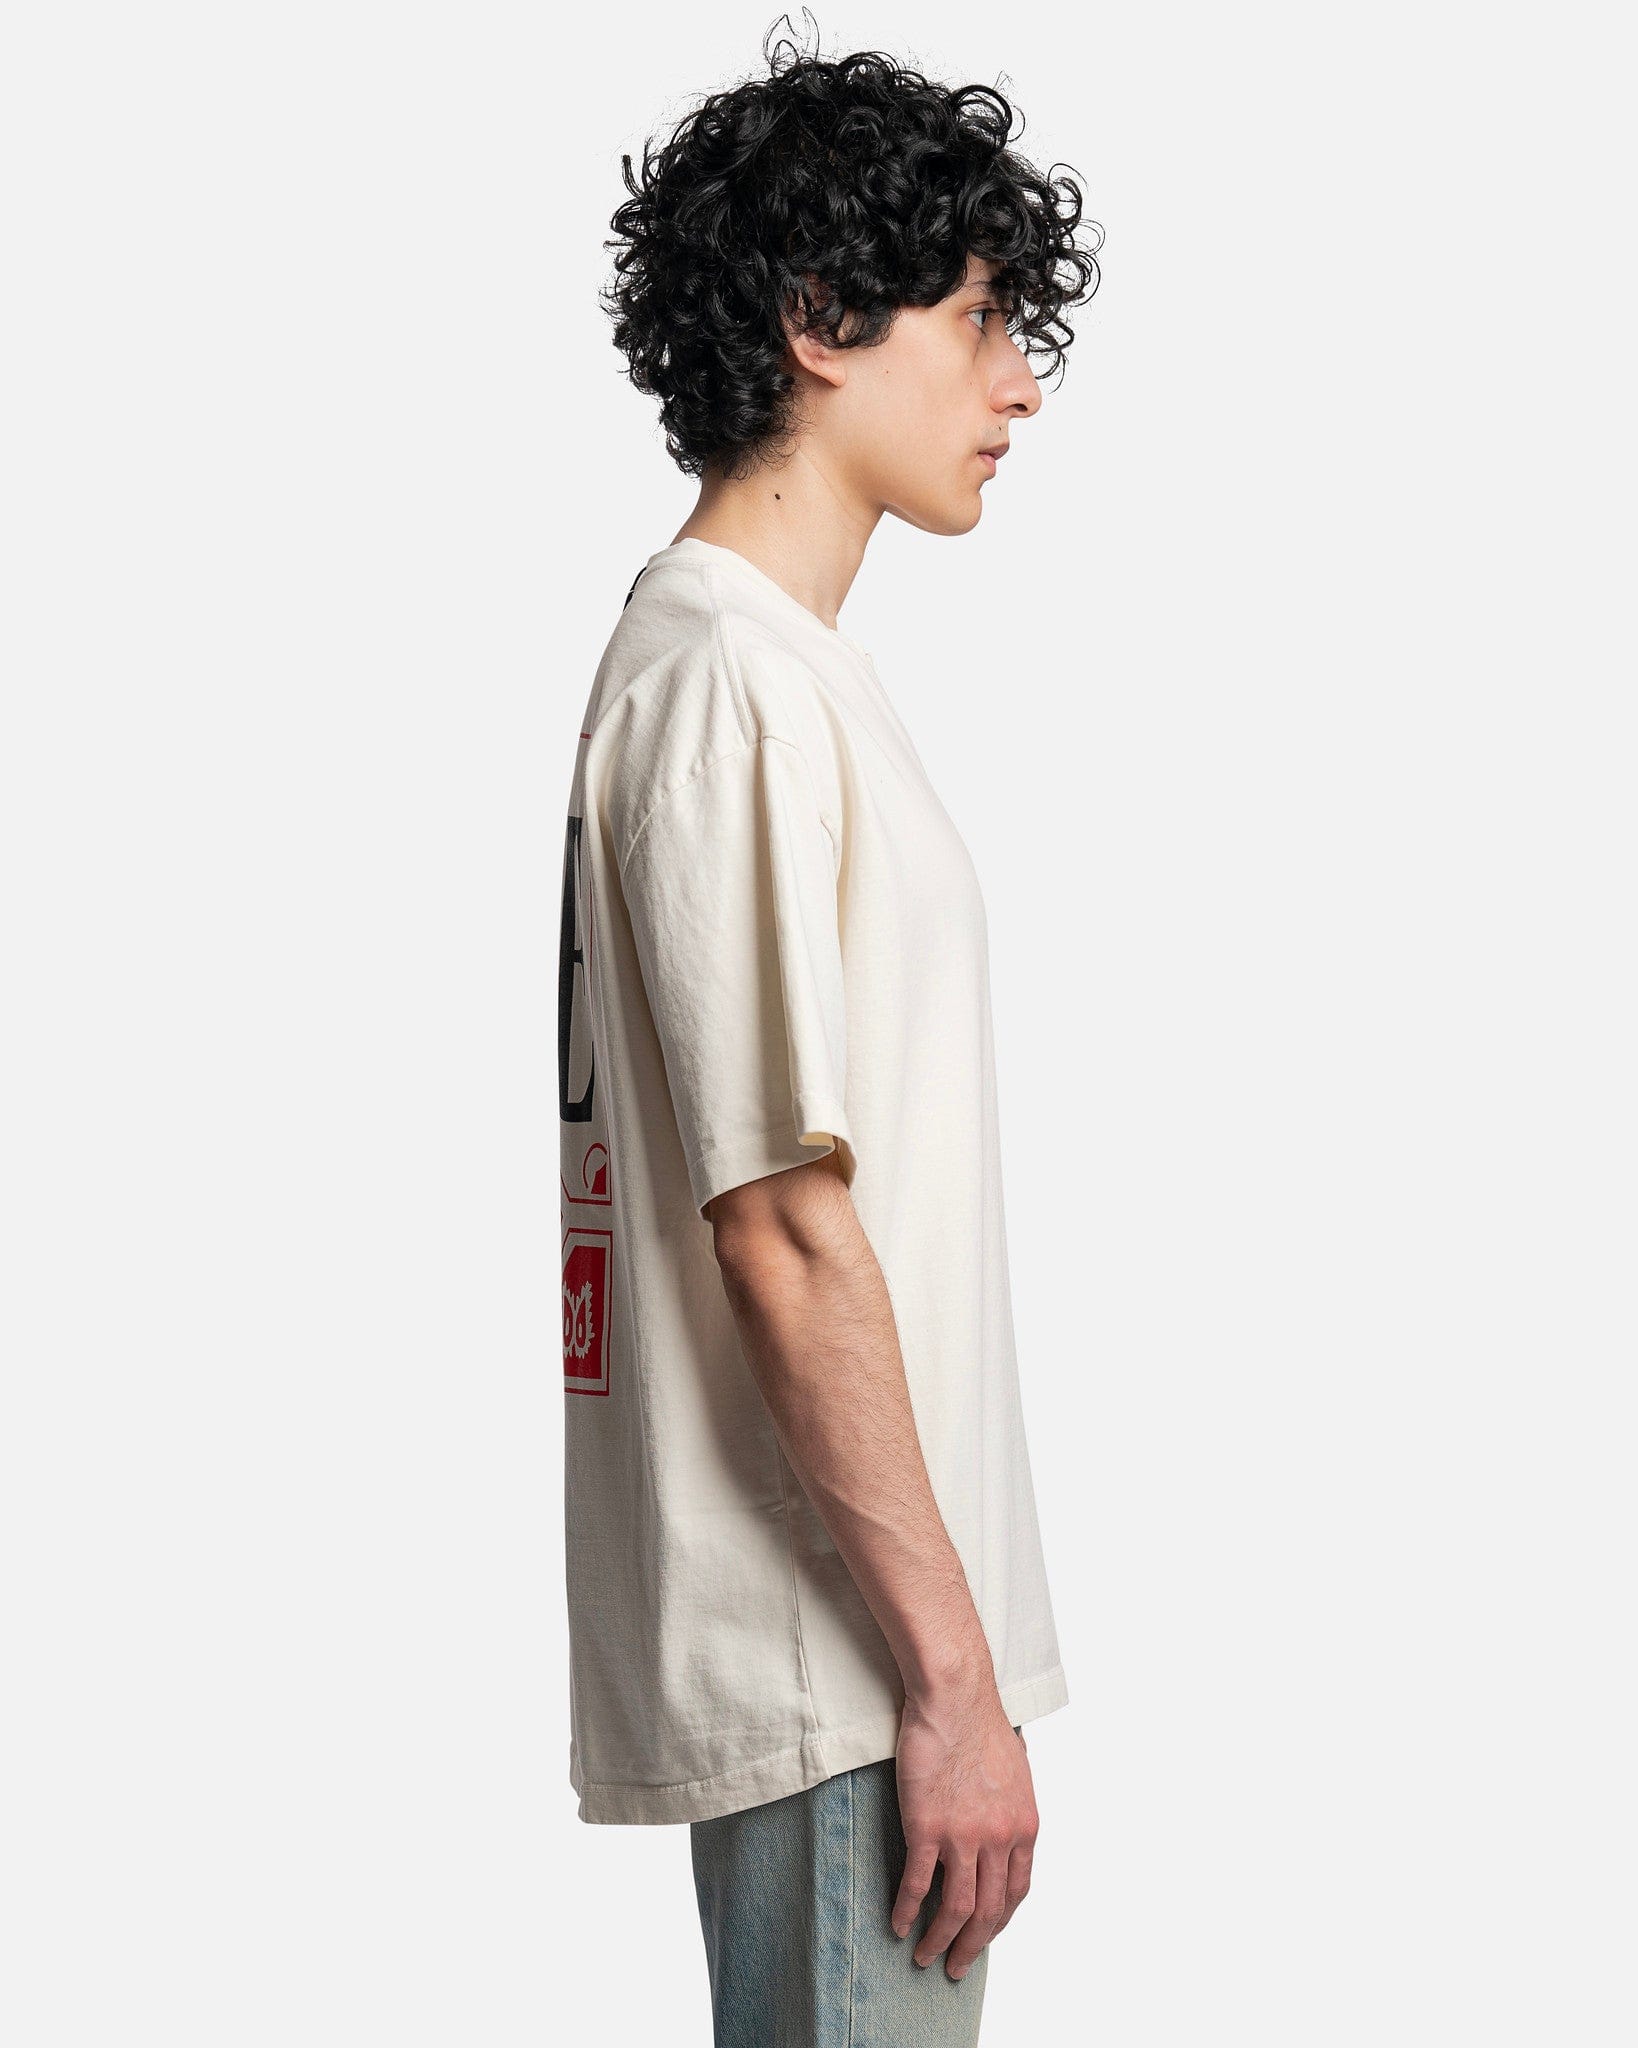 Rhude Men's T-Shirts Card T-Shirt in Vintage White